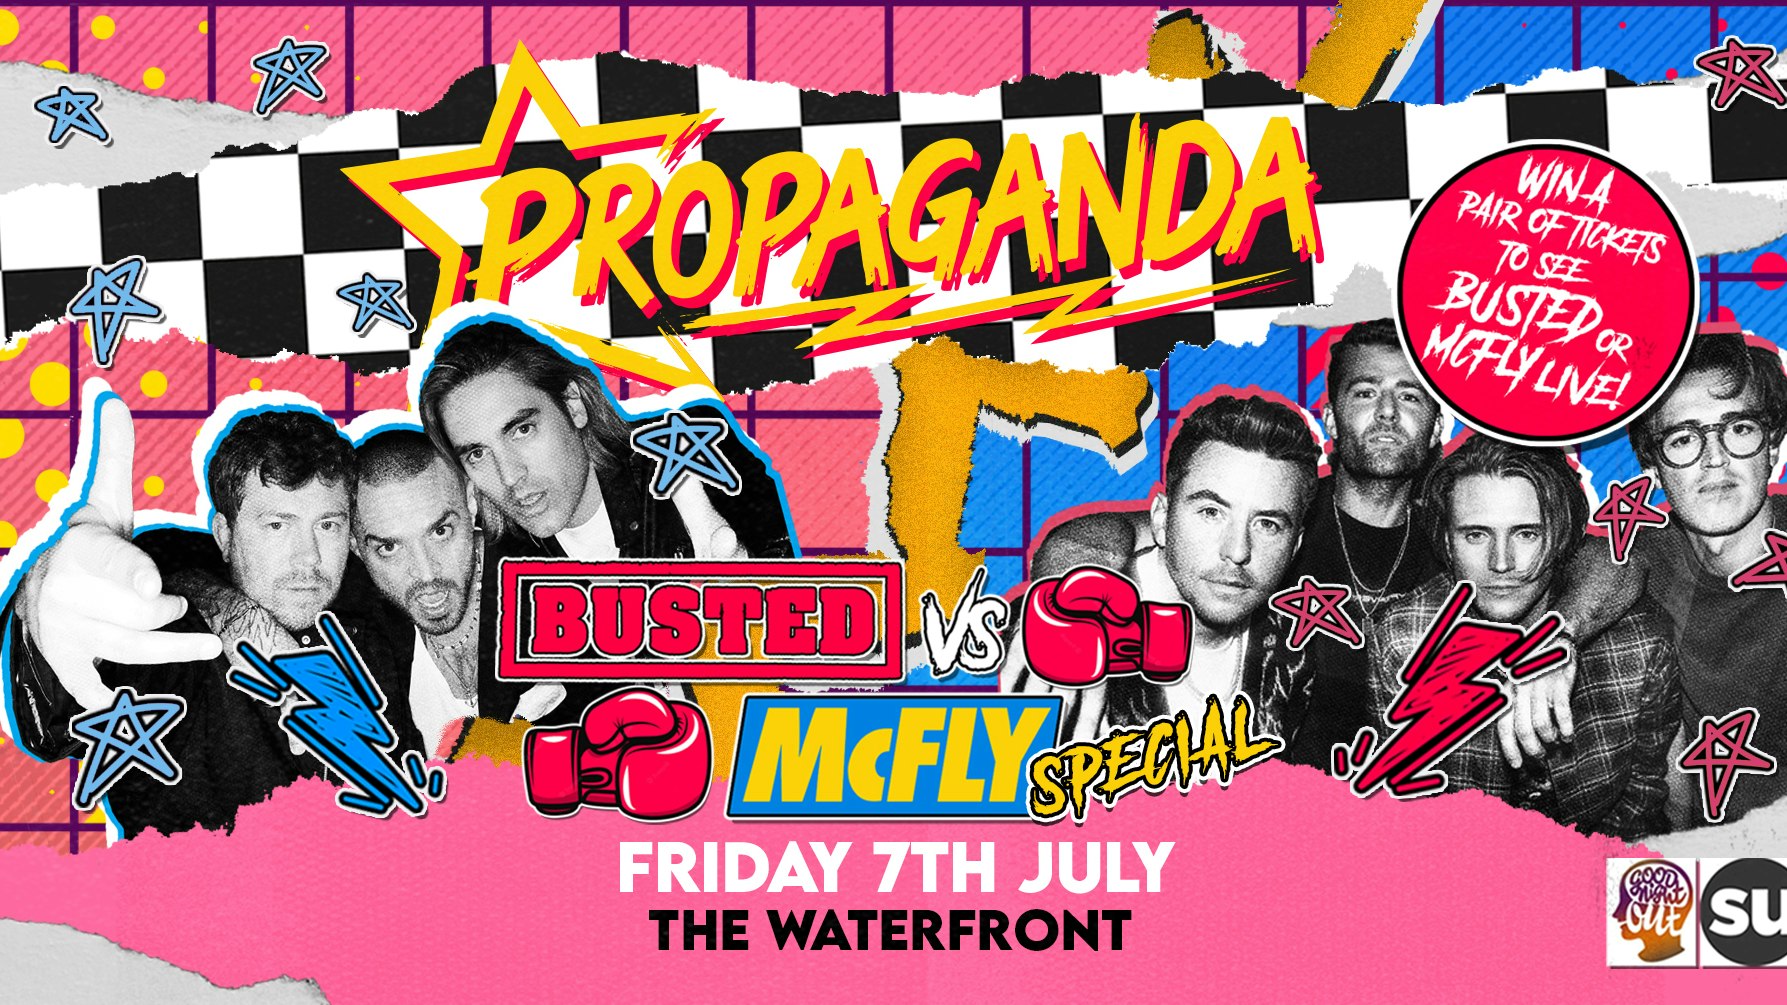 Propaganda Norwich – Busted Vs McFly Special! Plus win gig tickets!